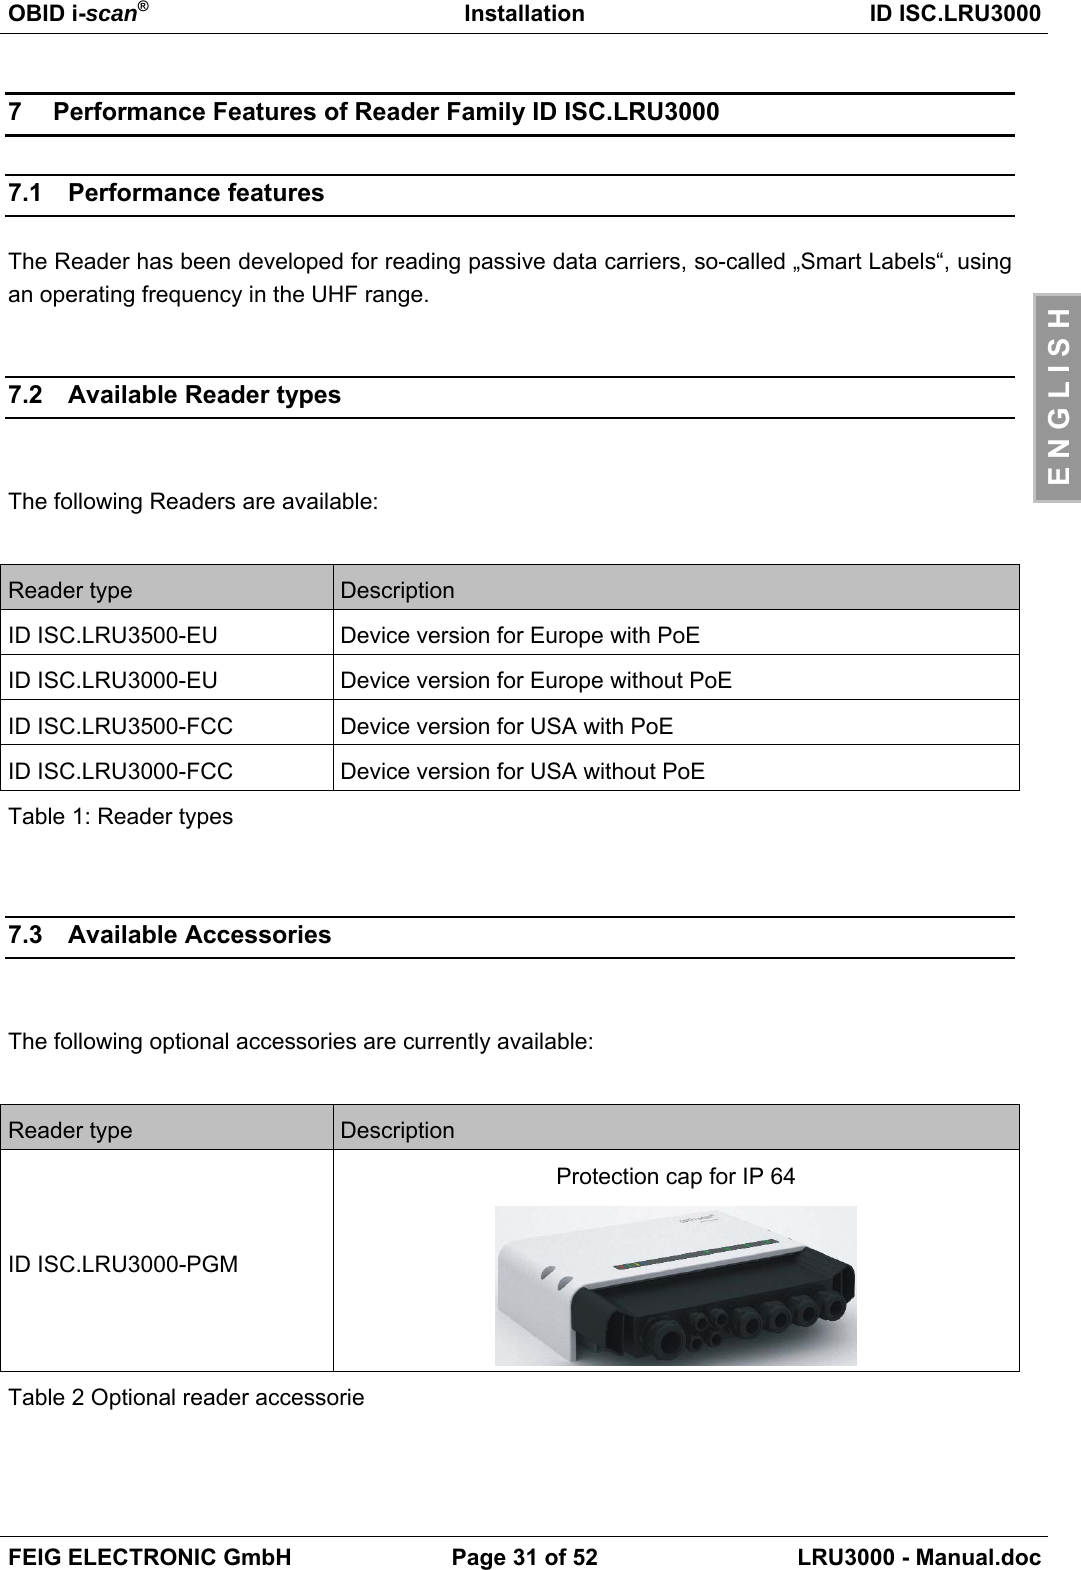 OBID i-scan®Installation ID ISC.LRU3000FEIG ELECTRONIC GmbH Page 31 of 52 LRU3000 - Manual.docE N G L I S H7  Performance Features of Reader Family ID ISC.LRU30007.1 Performance featuresThe Reader has been developed for reading passive data carriers, so-called „Smart Labels“, usingan operating frequency in the UHF range.7.2  Available Reader typesThe following Readers are available:Reader type DescriptionID ISC.LRU3500-EU Device version for Europe with PoEID ISC.LRU3000-EU Device version for Europe without PoEID ISC.LRU3500-FCC Device version for USA with PoEID ISC.LRU3000-FCC Device version for USA without PoETable 1: Reader types7.3 Available AccessoriesThe following optional accessories are currently available:Reader type DescriptionID ISC.LRU3000-PGMProtection cap for IP 64Table 2 Optional reader accessorie